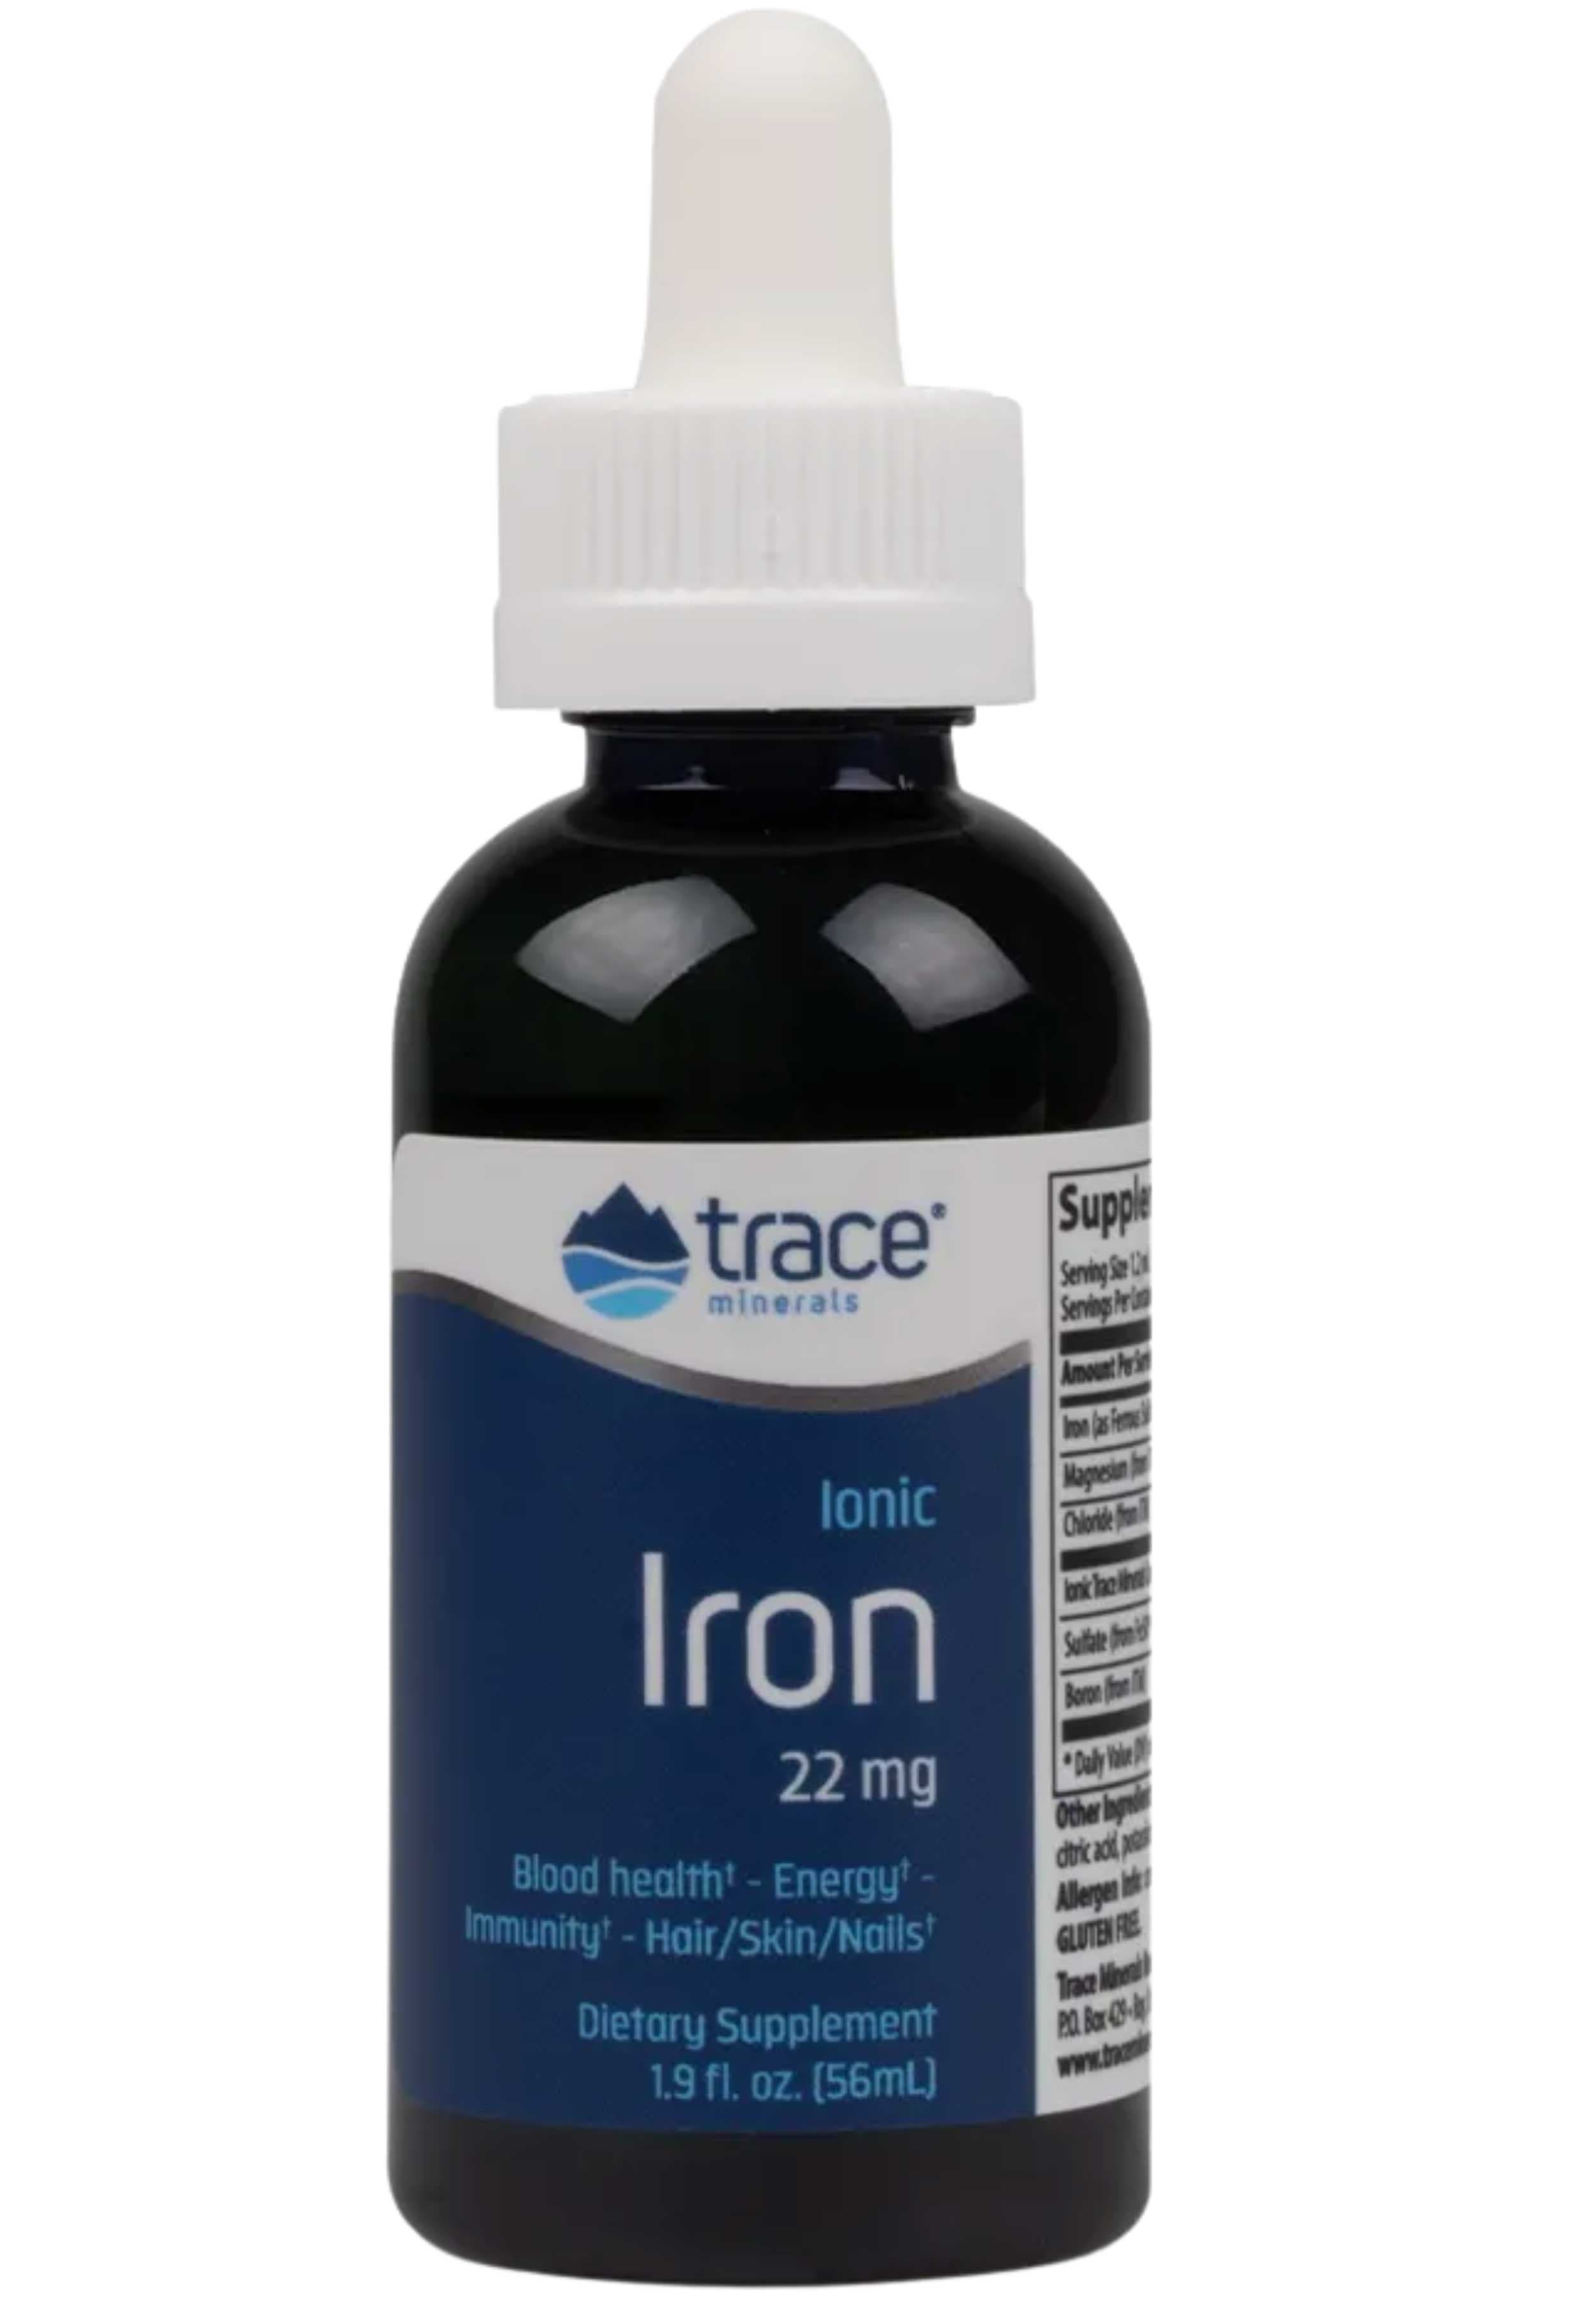 Trace Minerals Research Ionic Iron